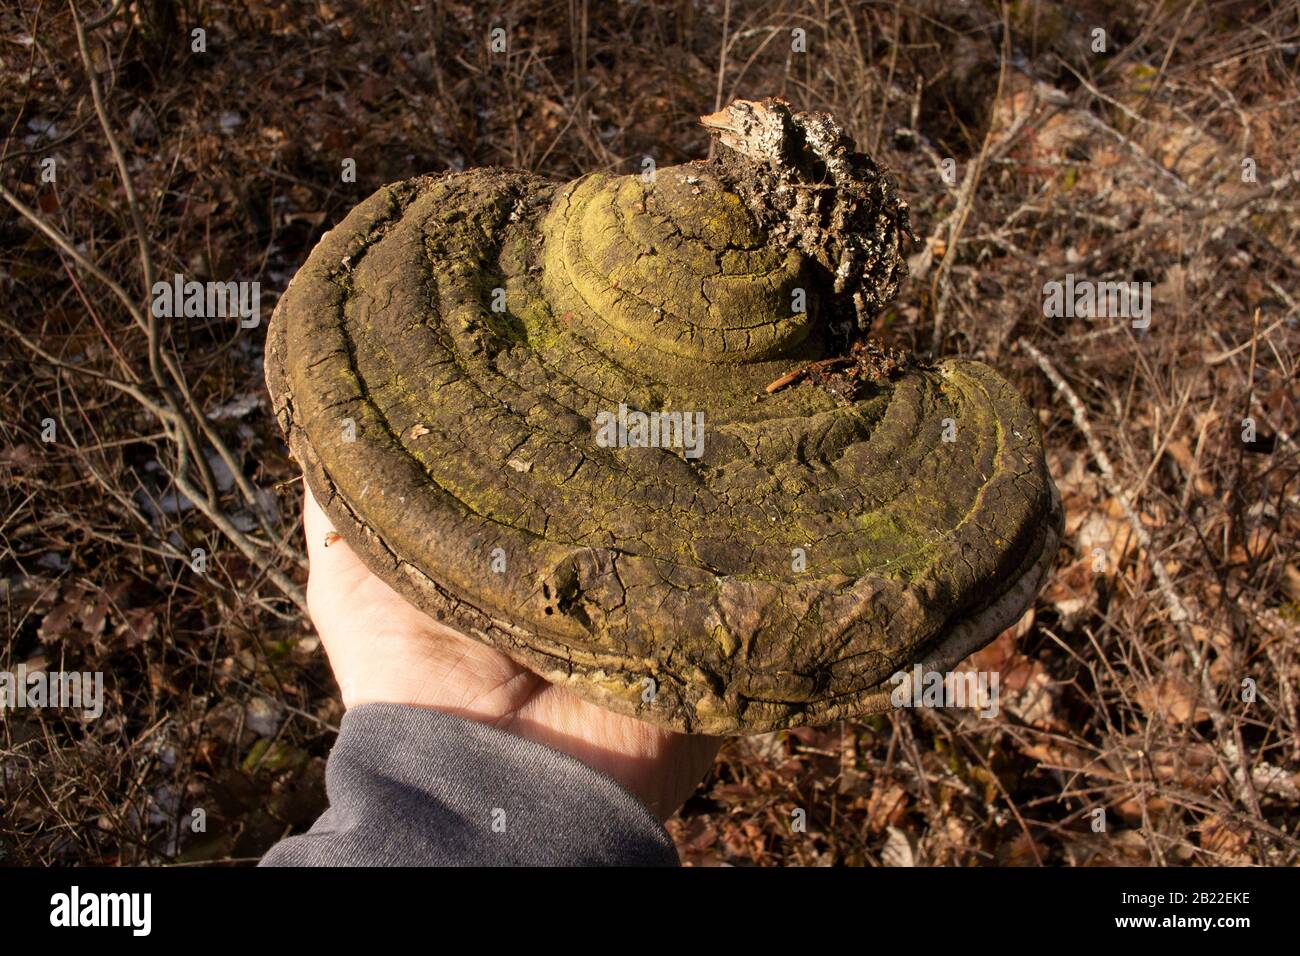 Holding a Black Bristle Bracket mushrooms (Phellinus nigricans) that was found growing on the trunk of a dead red birch tree (Betula occidentalis), Stock Photo